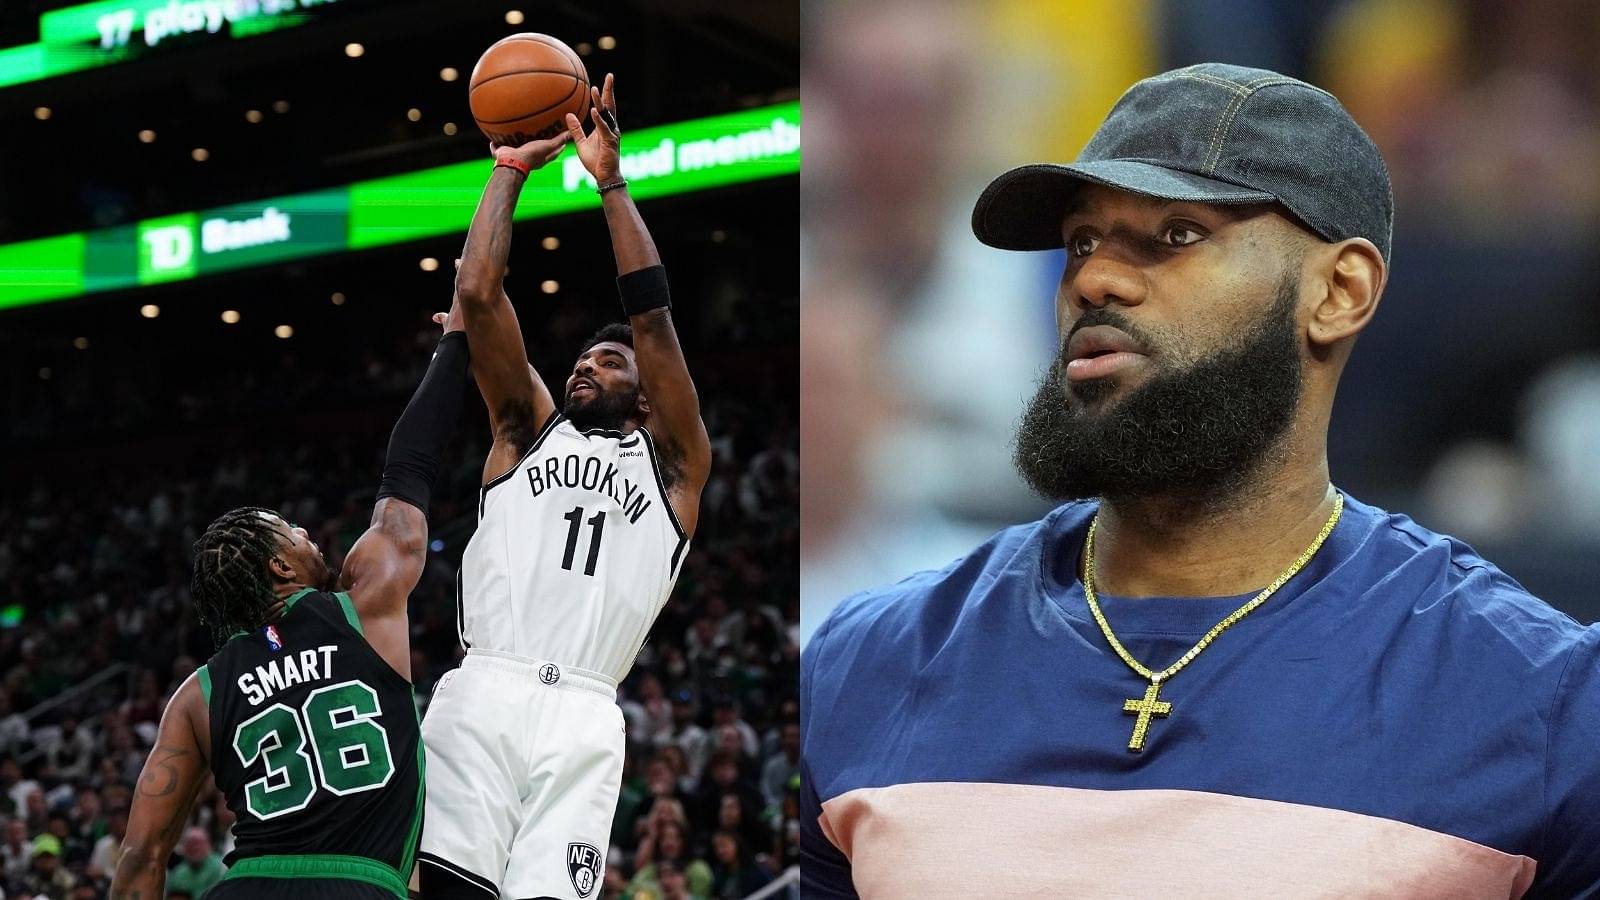 “Young God- Kyrie Irving is so damn good at basketball man!!! INSANE SKILL!!”: LeBron James and NBA Twitter are spellbound by Nets superstar's performance in a 1-point loss to the Celtics